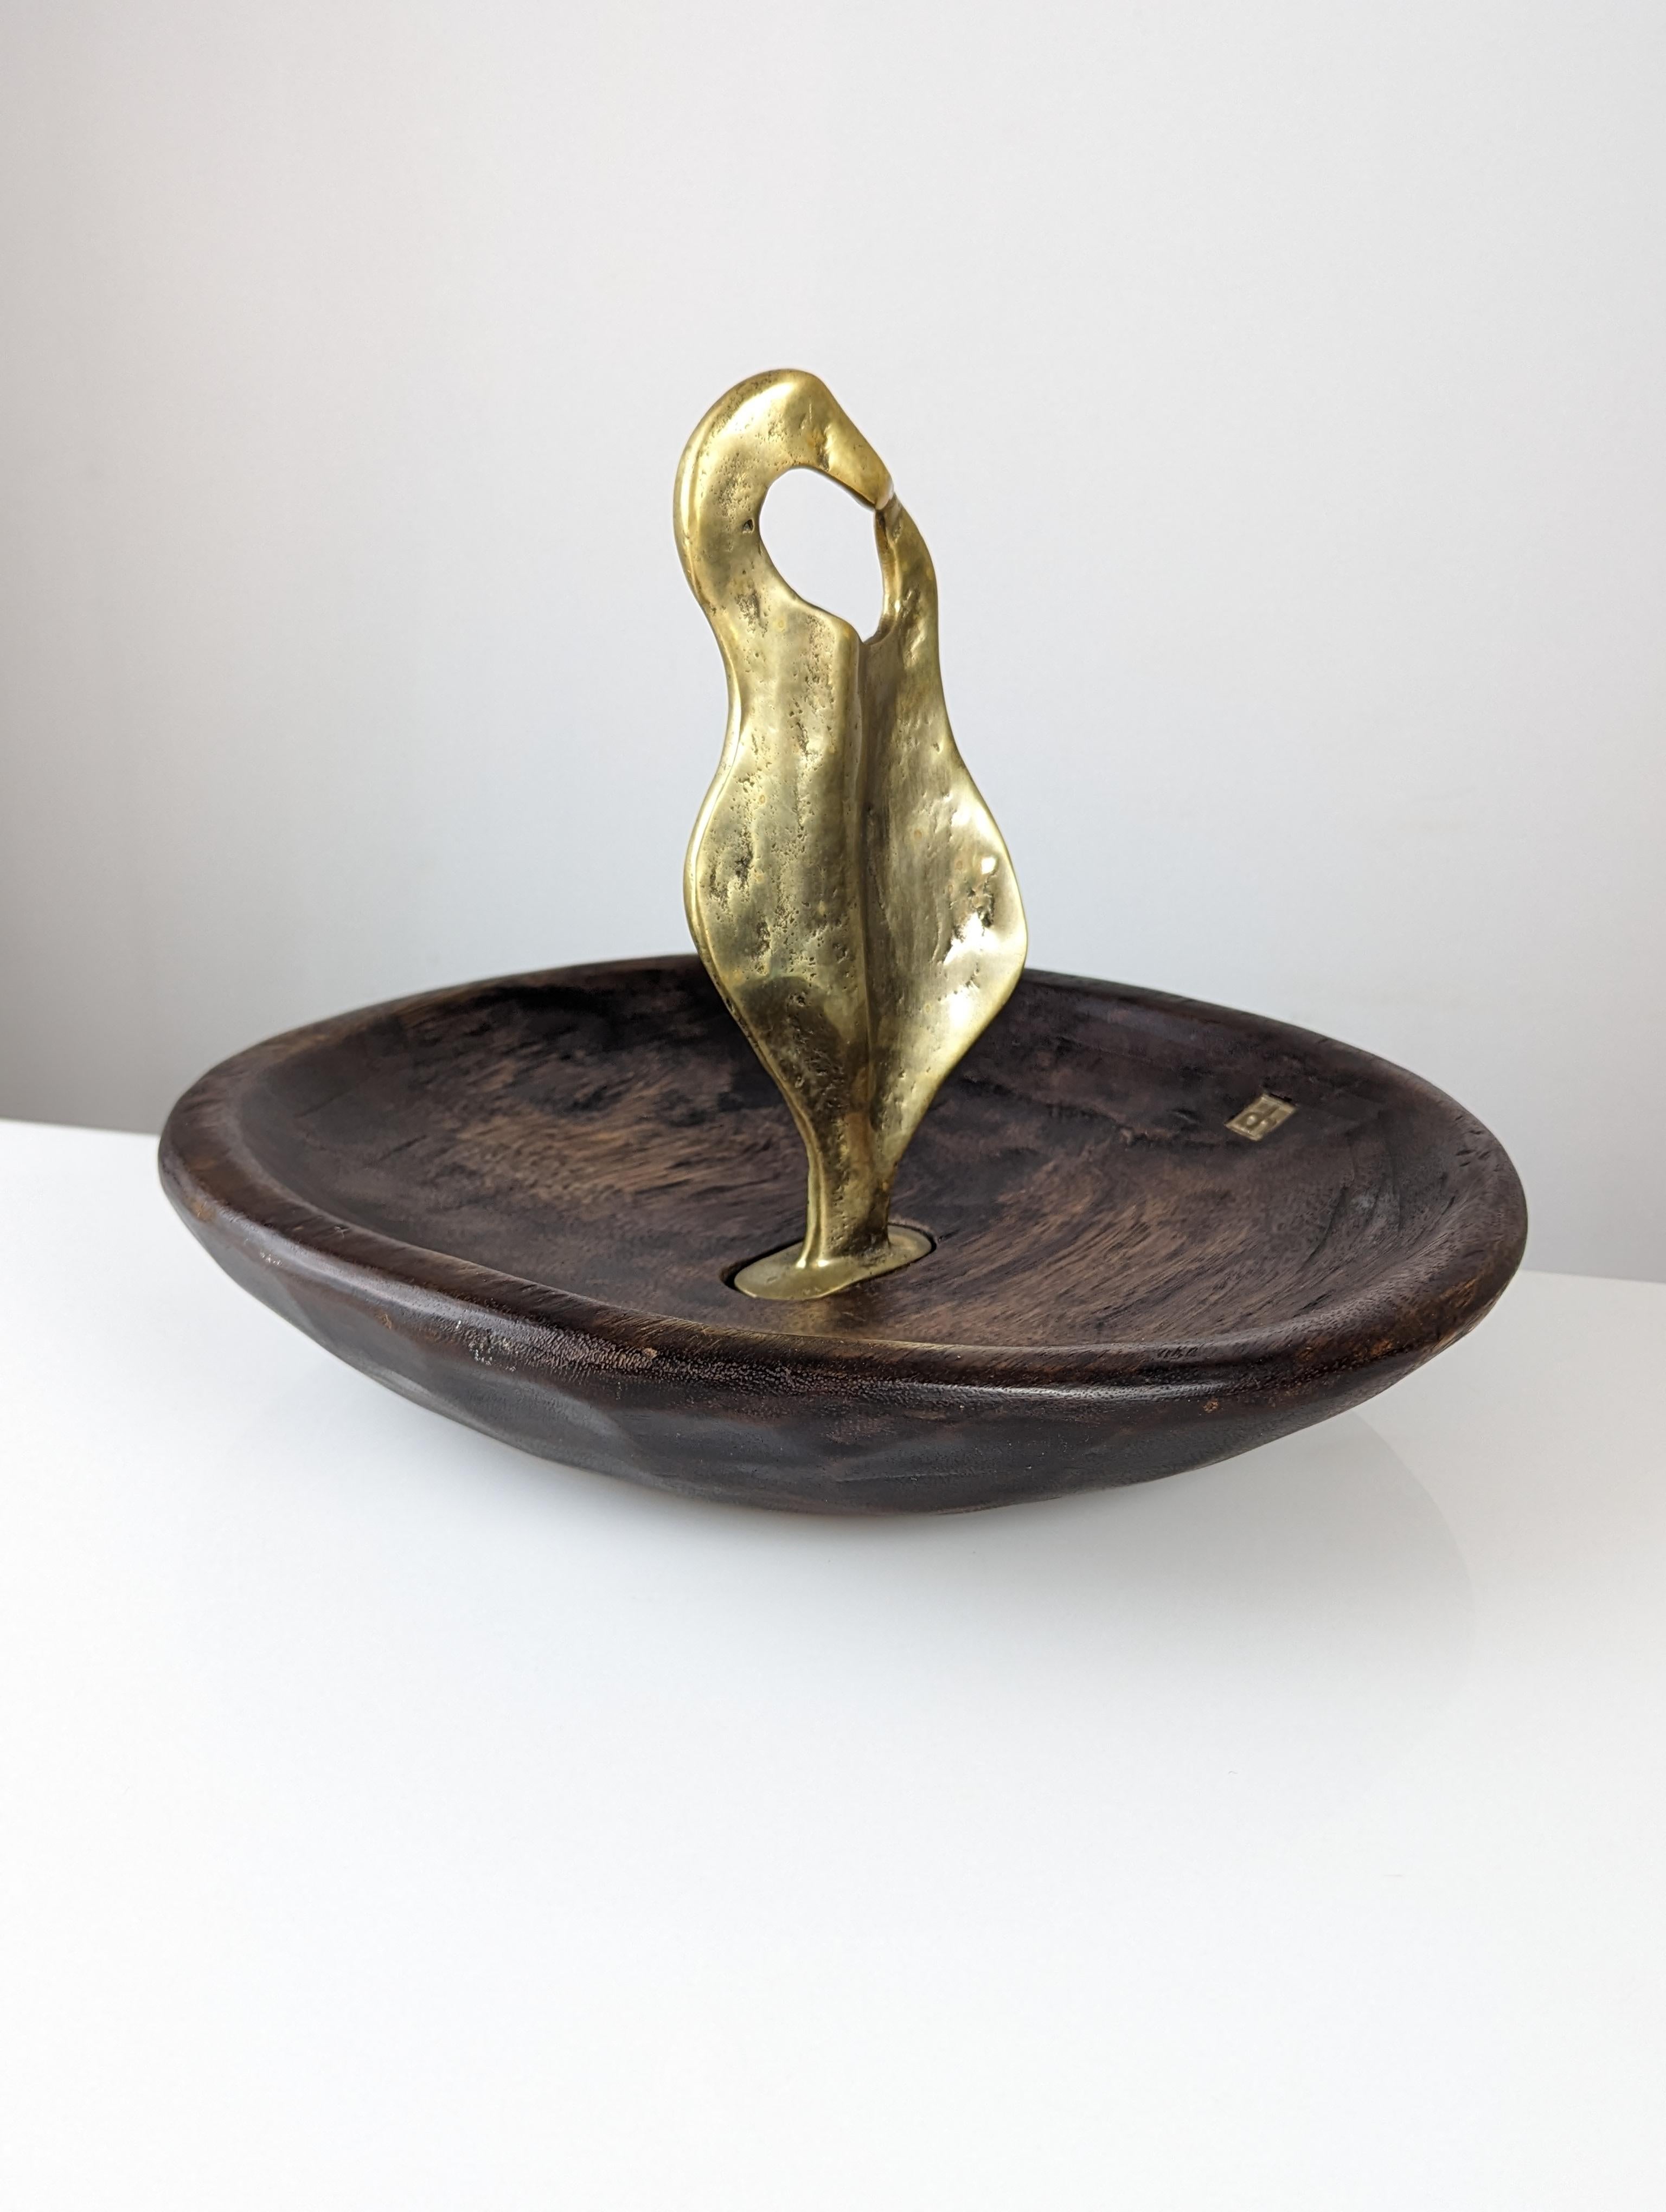 Exceptional sculptural fruit bowl by David Marshall, a handmade masterpiece that fuses the warmth of wood with the sophistication of bronze. This piece reflects the artist's craftsmanship, from the carefully selected wood to the bronze sculptural